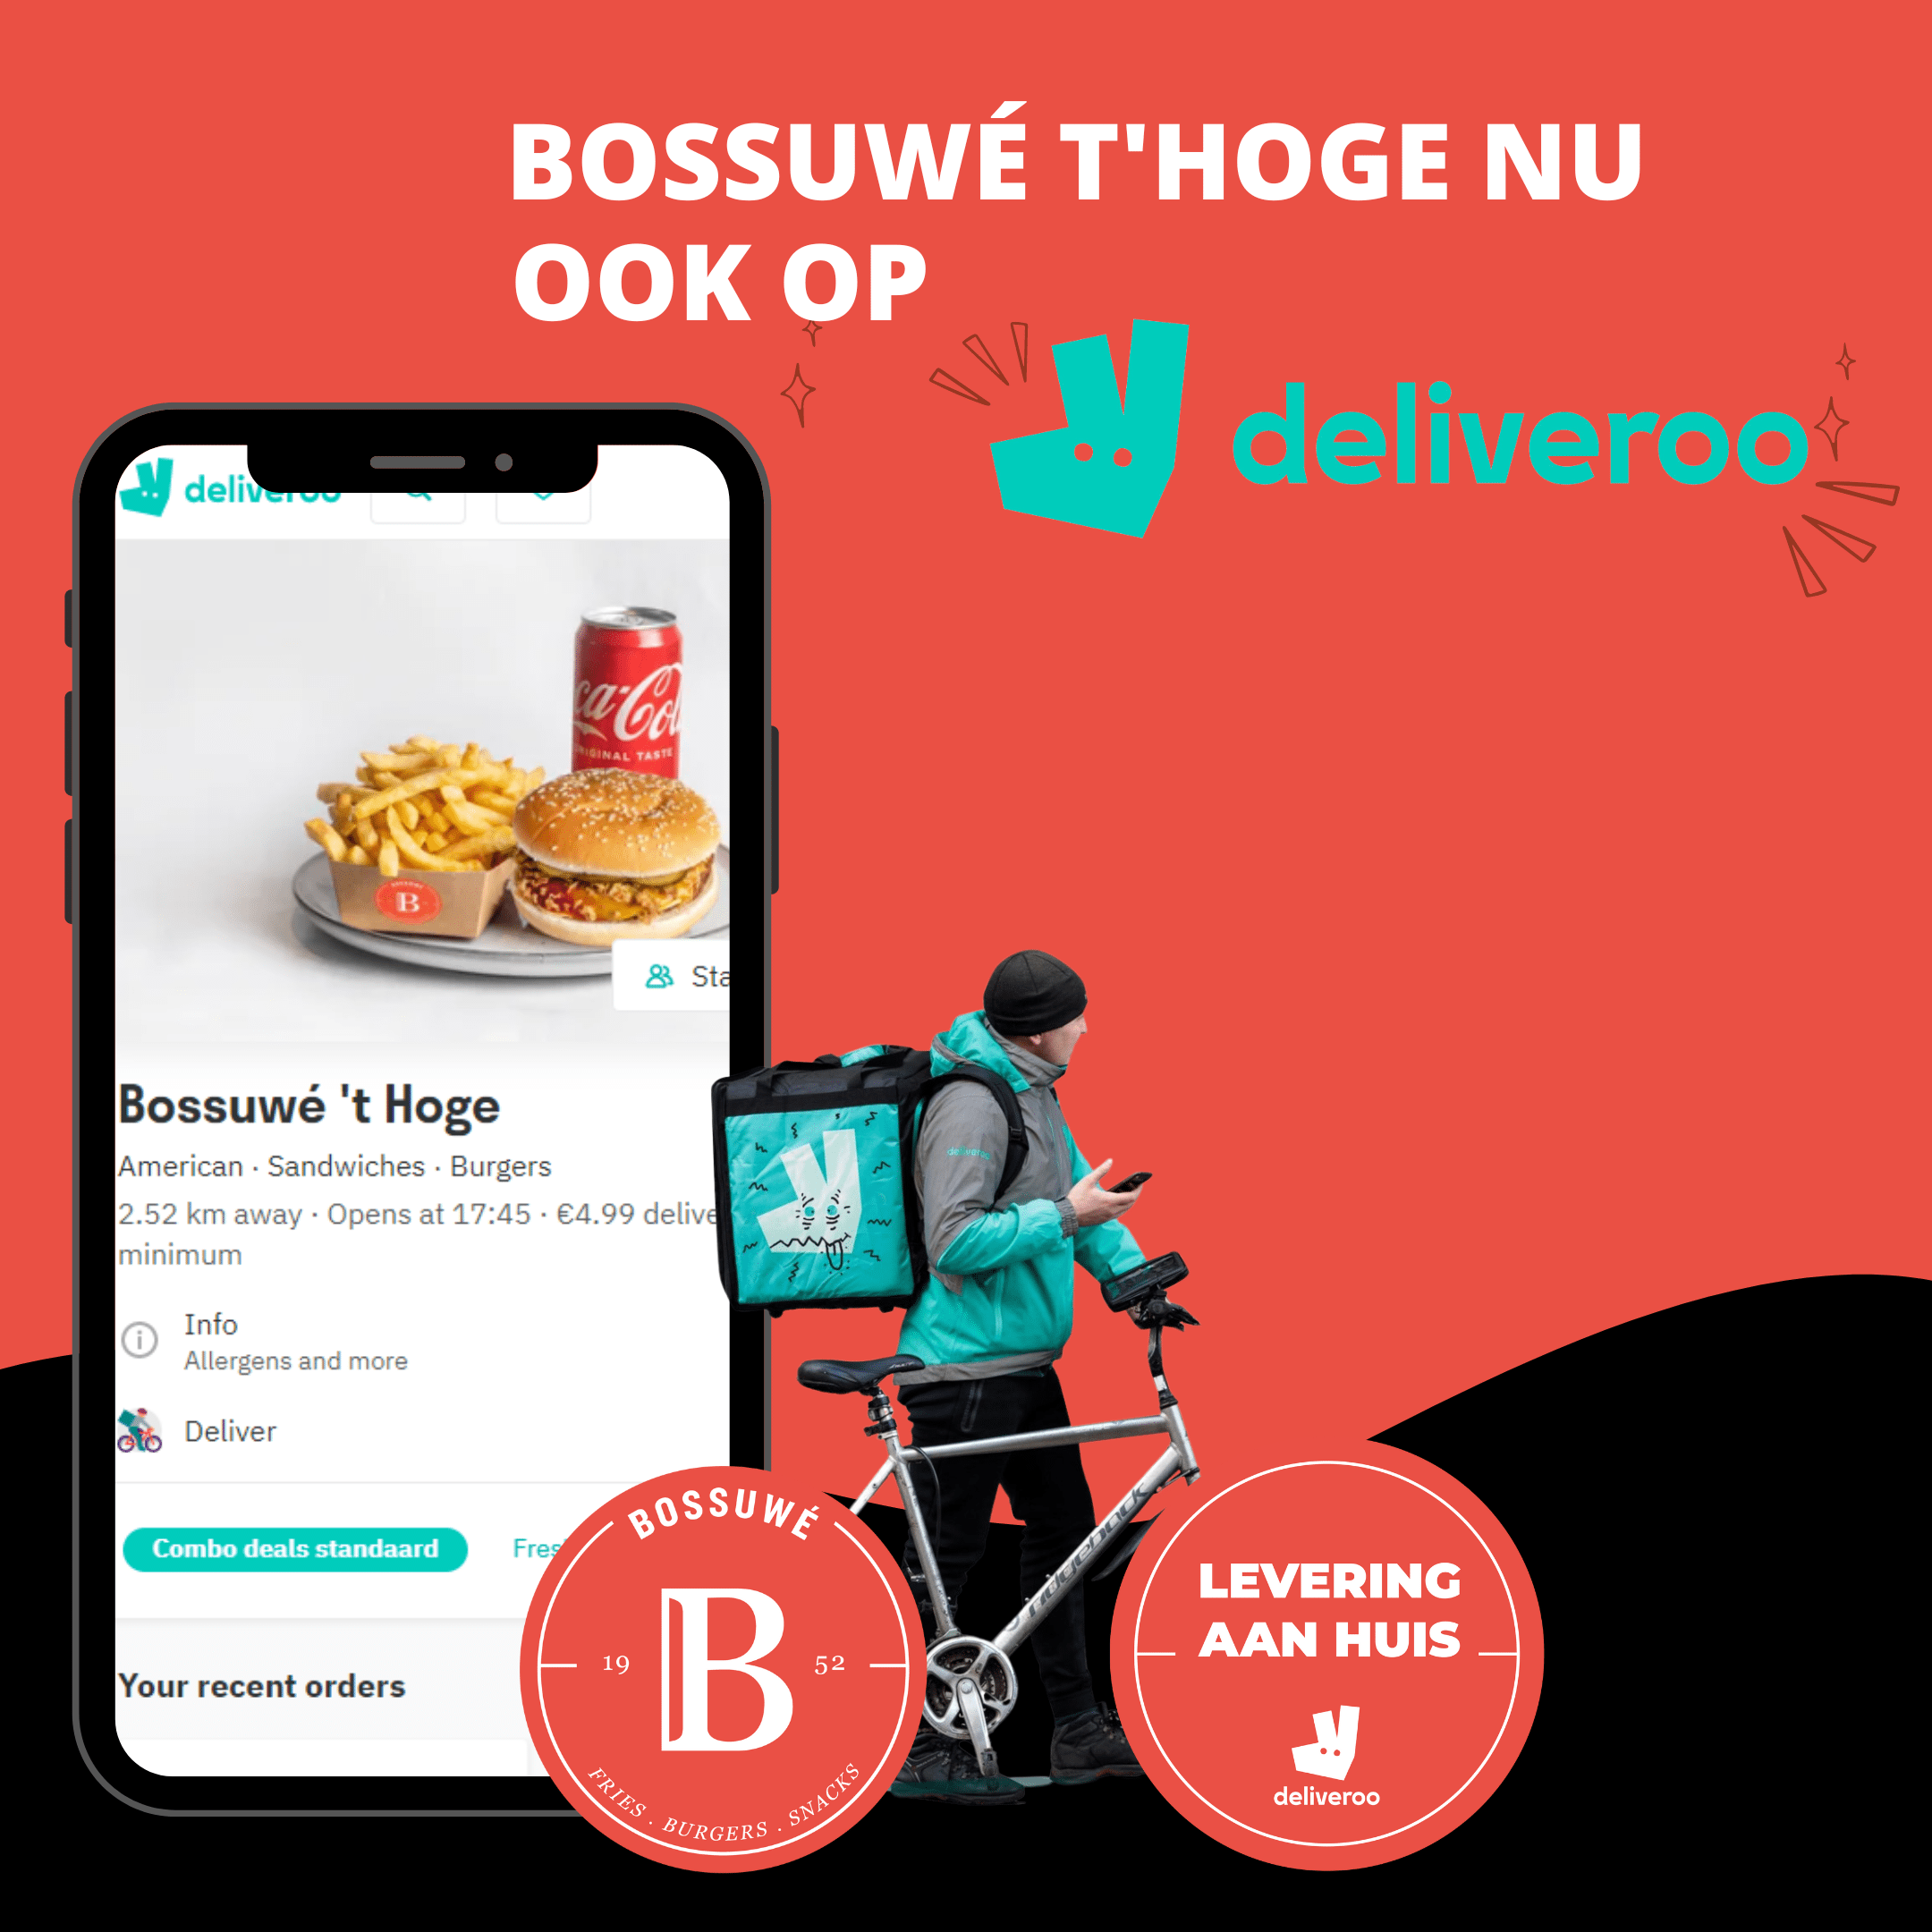 Picture of fries, deliveroo guy